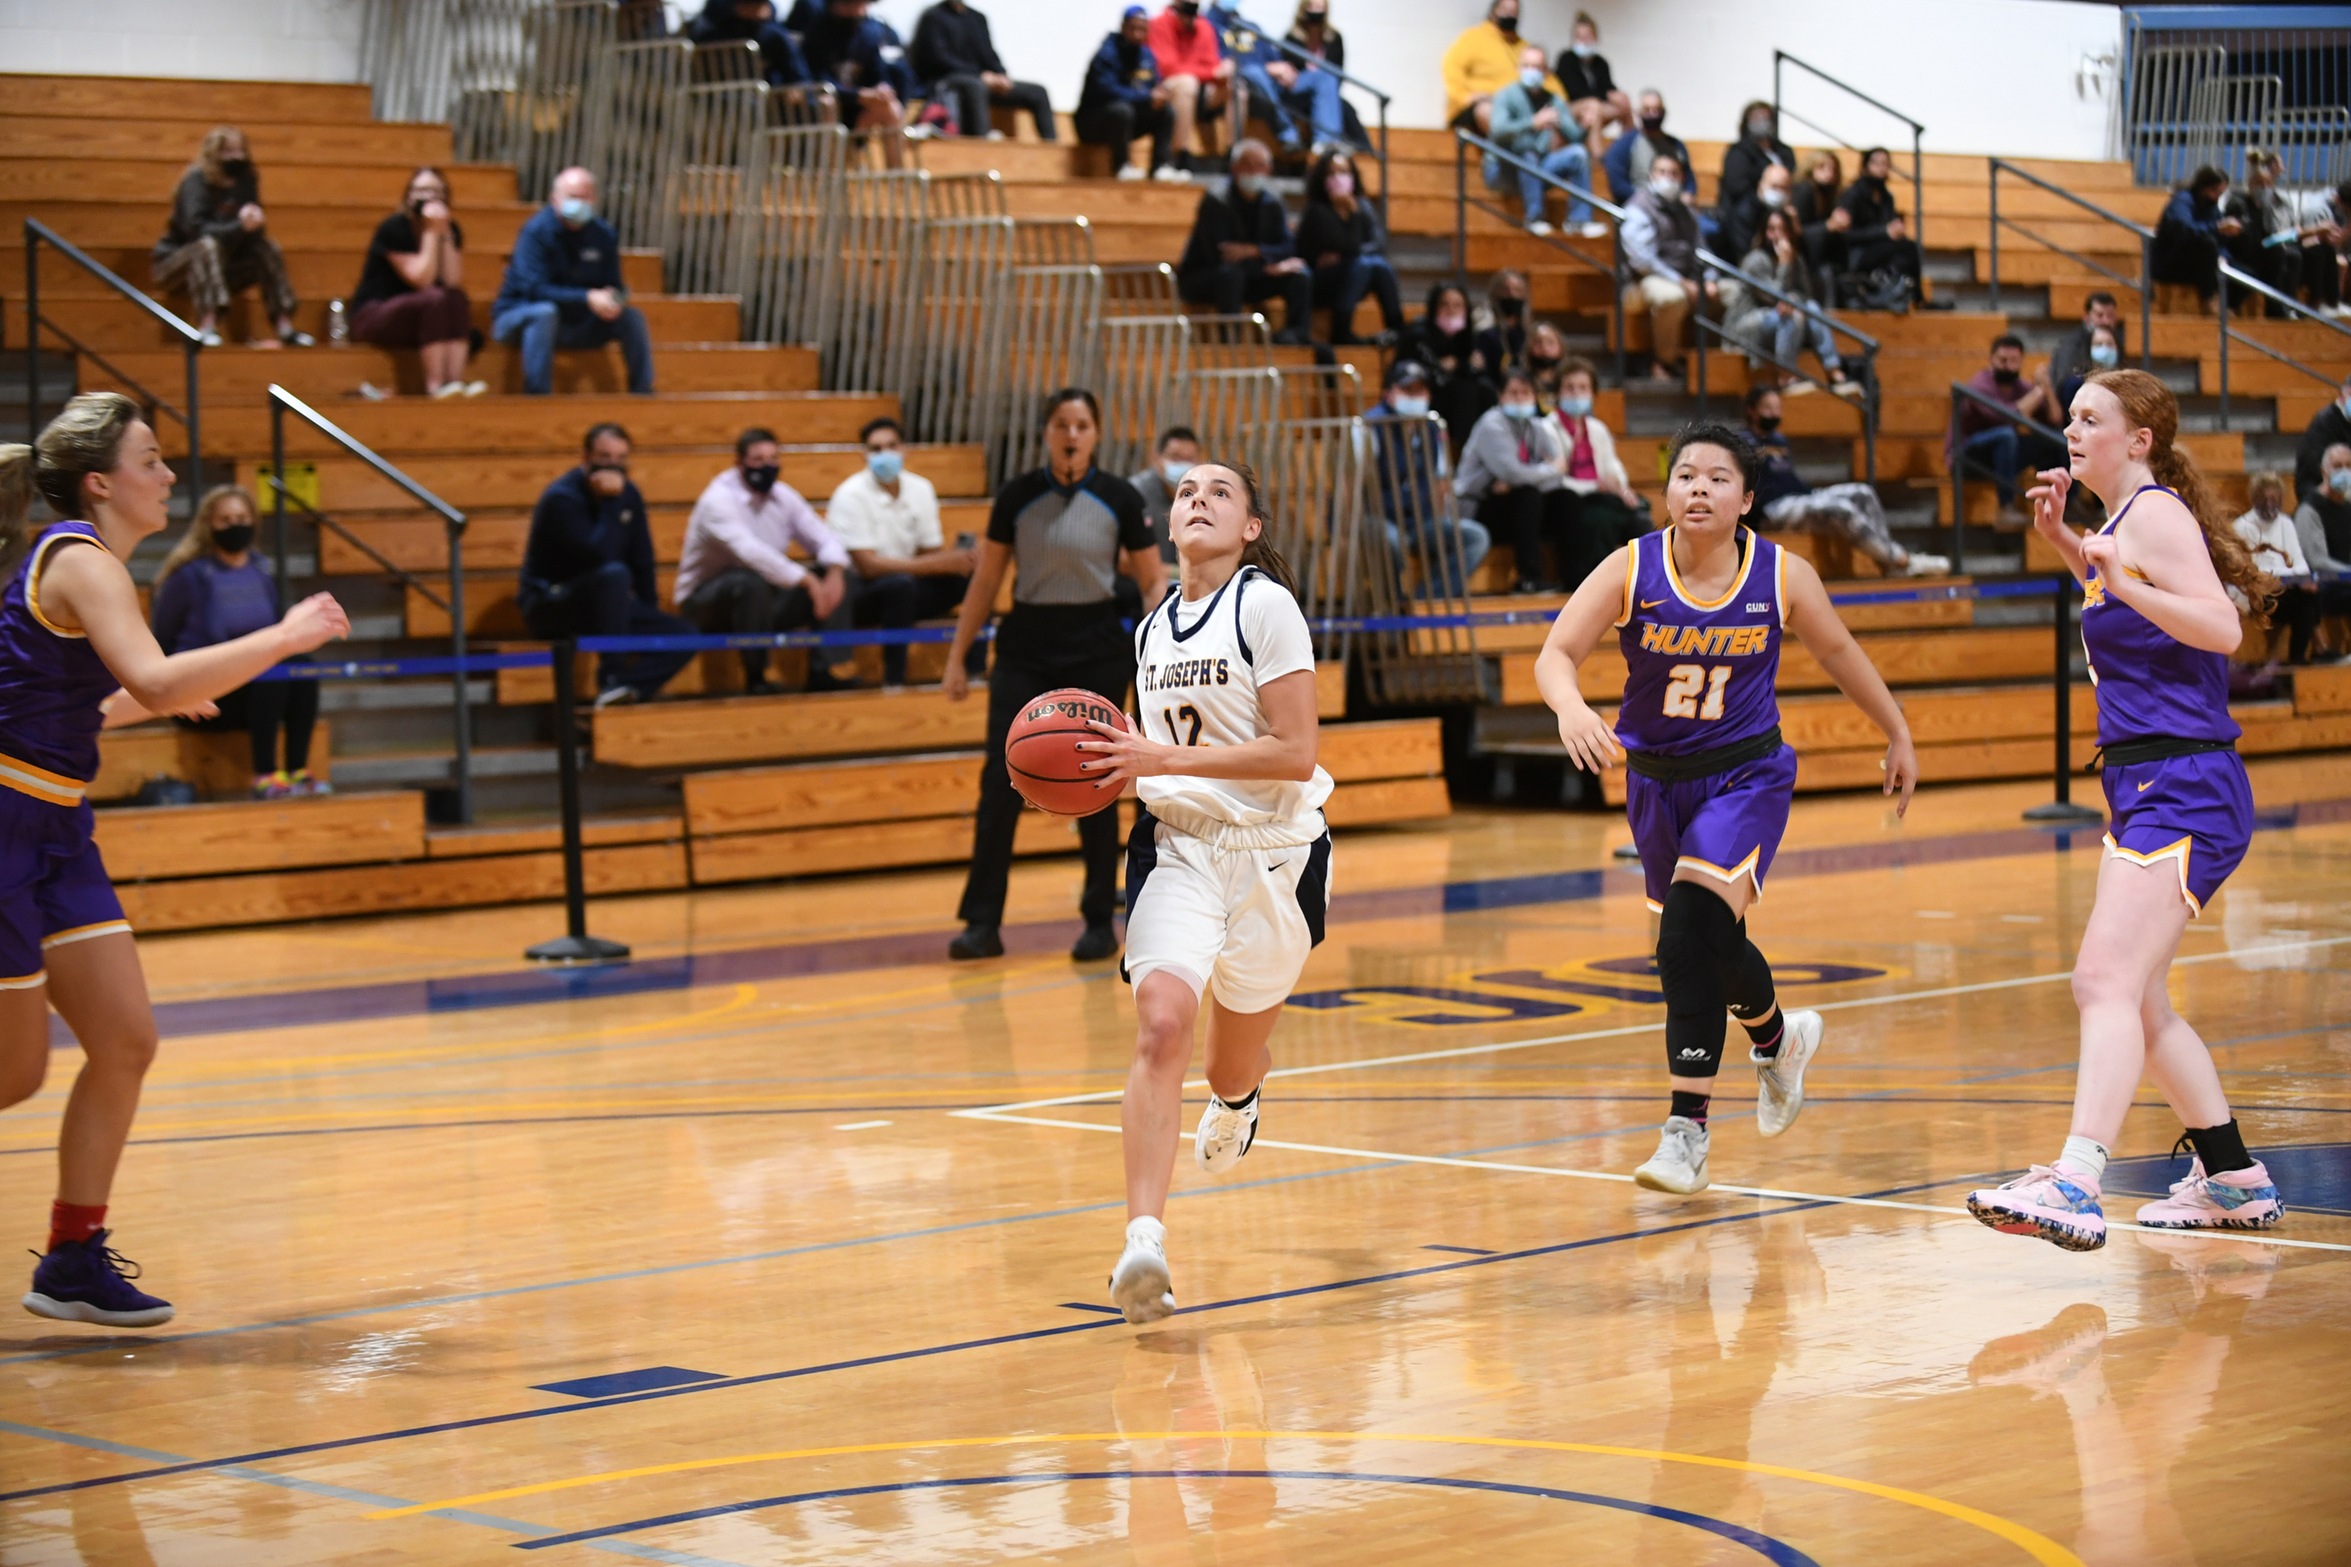 Women's Basketball Drops Fifth Conference Loss To Sarah Lawrence, 67-62